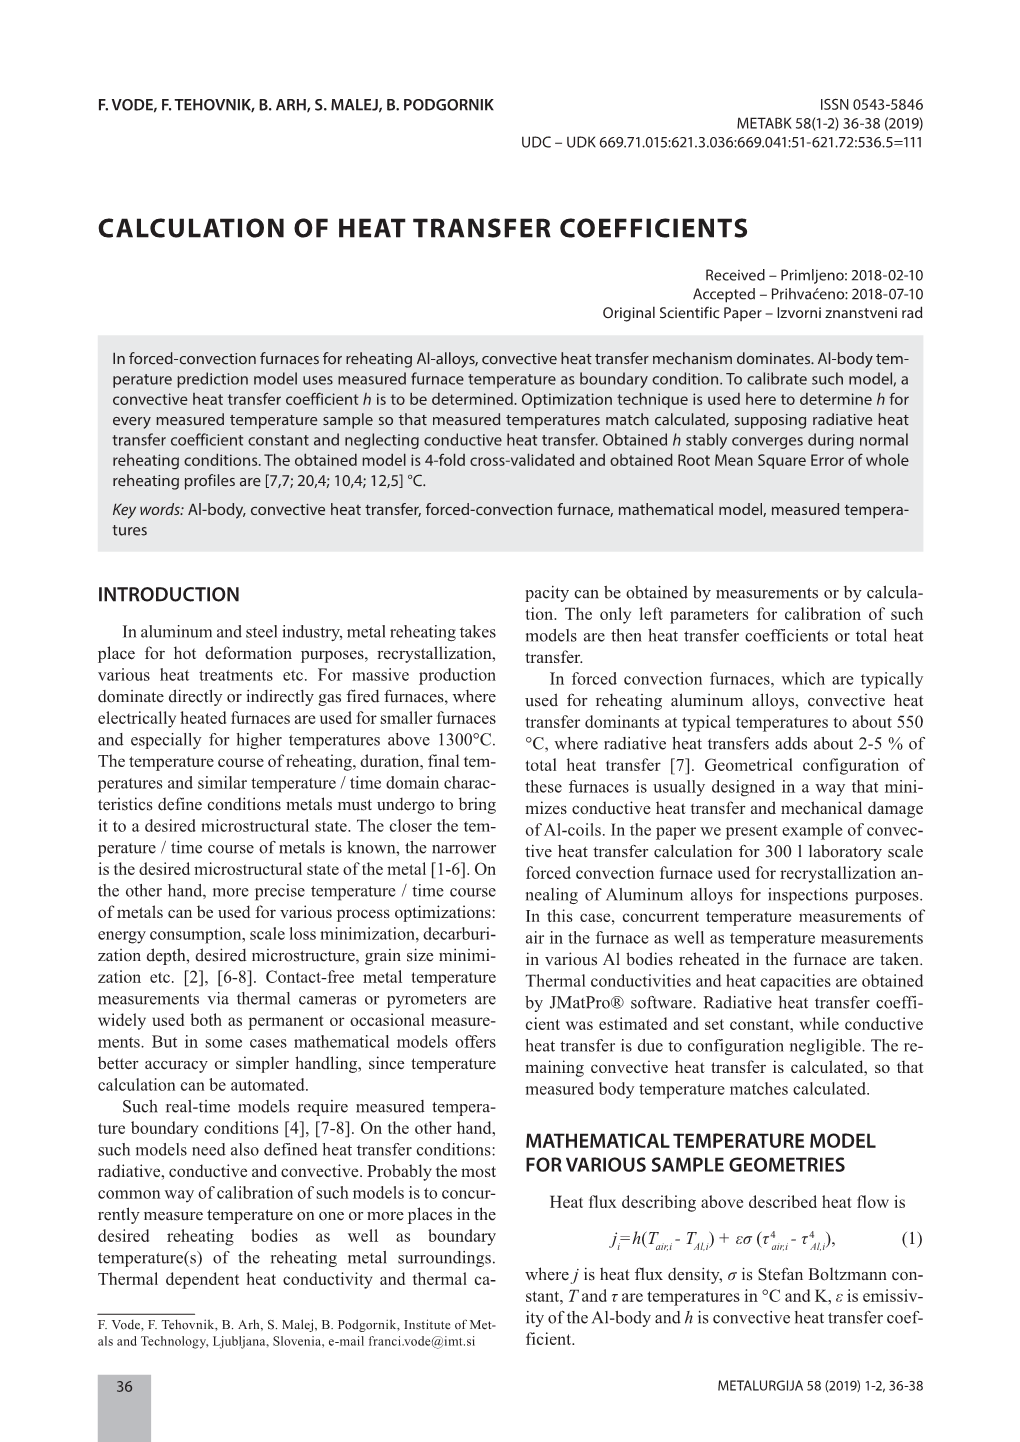 Calculation of Heat Transfer Coefficients